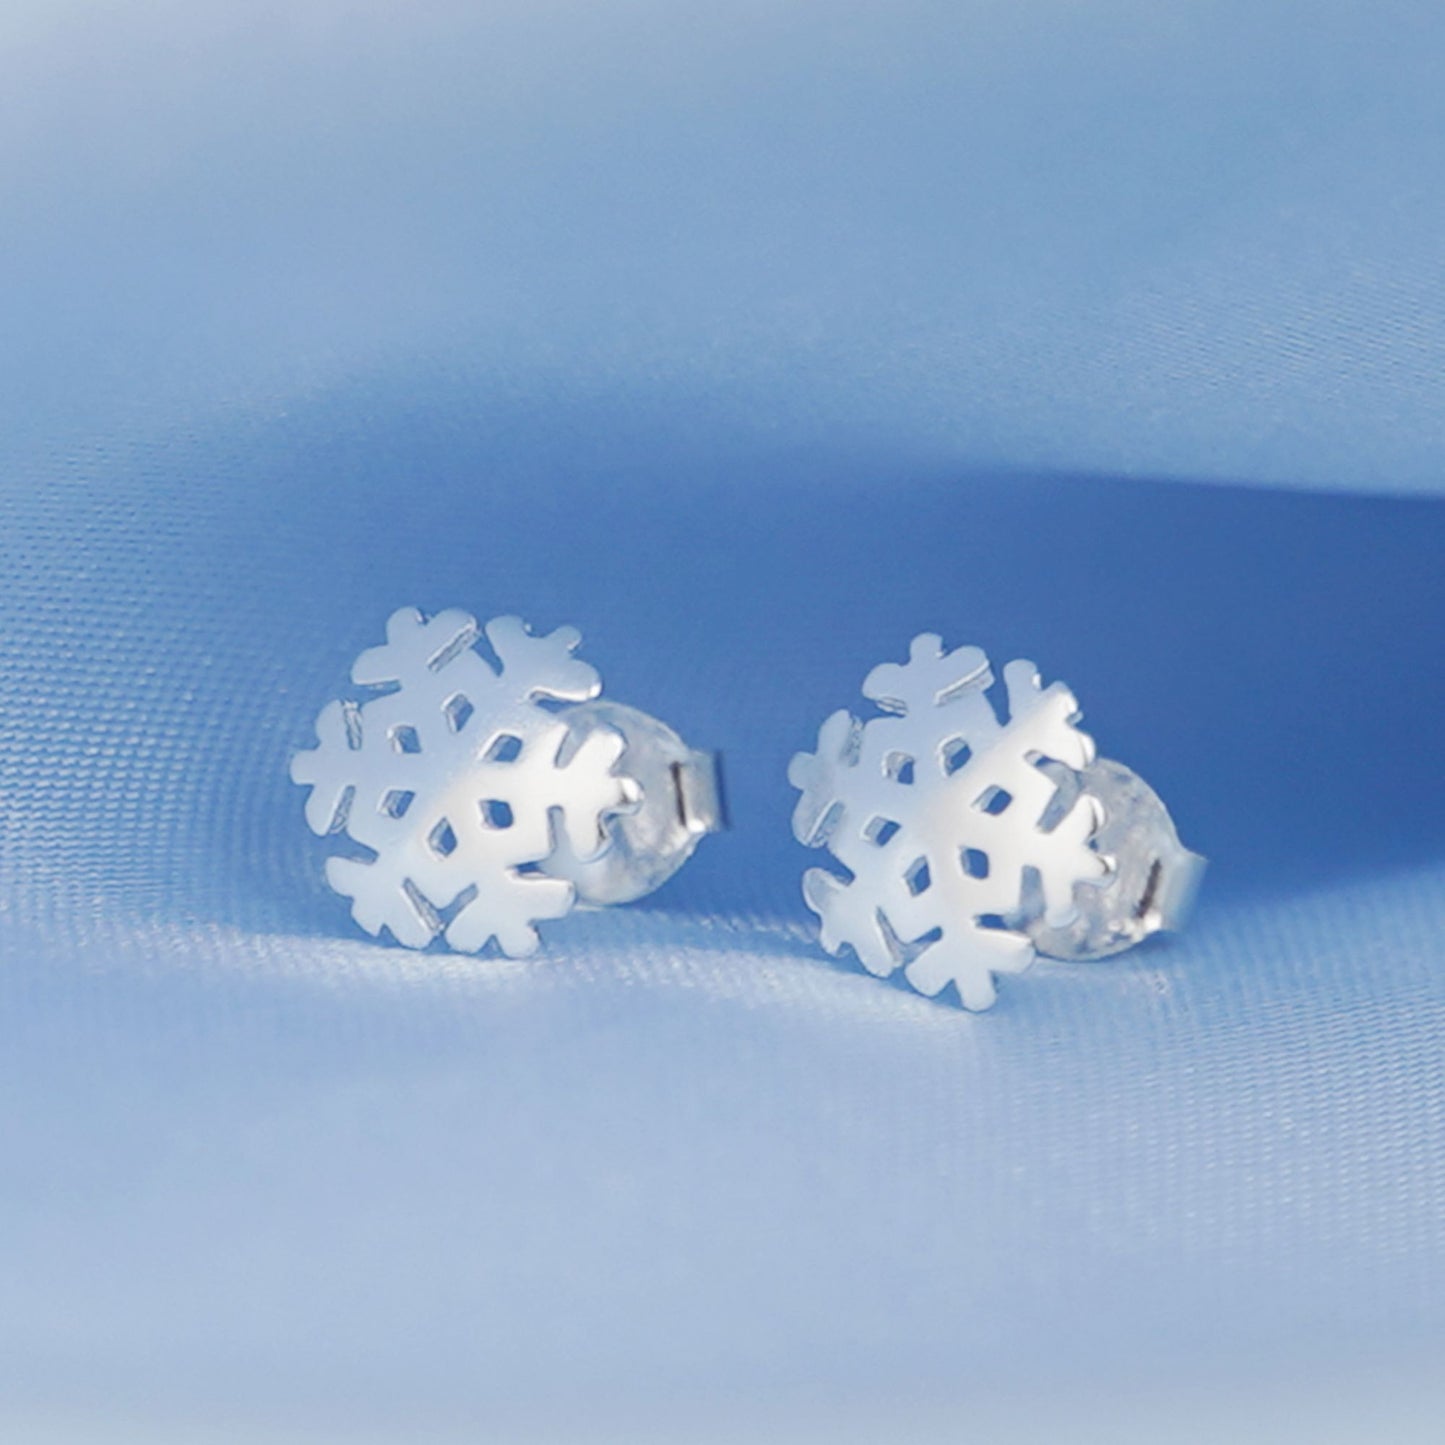 Sterling Silver Hollow Out Shiny Snowflake Stud Earrings - 9mm Christmas Snowflake Earrings